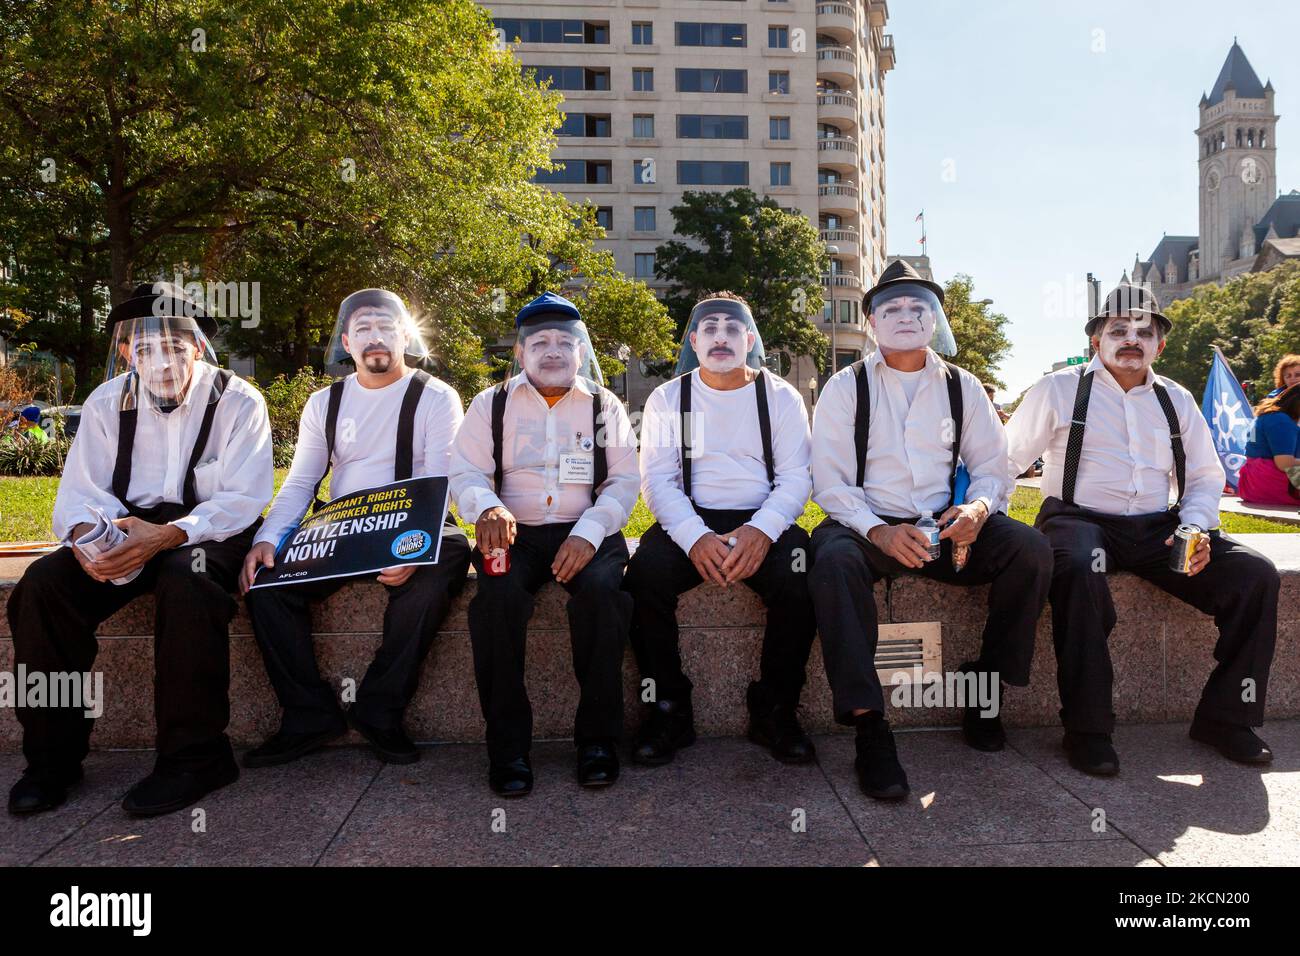 A group of men dressed as mimes await the beginning of a march for permanent residency for immigrants with temporary protected status in the US. They are part of a group acting out scenes of family separation as a result of US immigration policies. Protesters are pressuring Congress to include permanent status for TPS holders, Dreamers, temporary workers, and essential workers in the budget reconciliation bill currently underway consideration. This task has taken on greater urgency since the Senate parliamentarian’s recommendation that residency and citizenship be excluded from the bill. (Phot Stock Photo